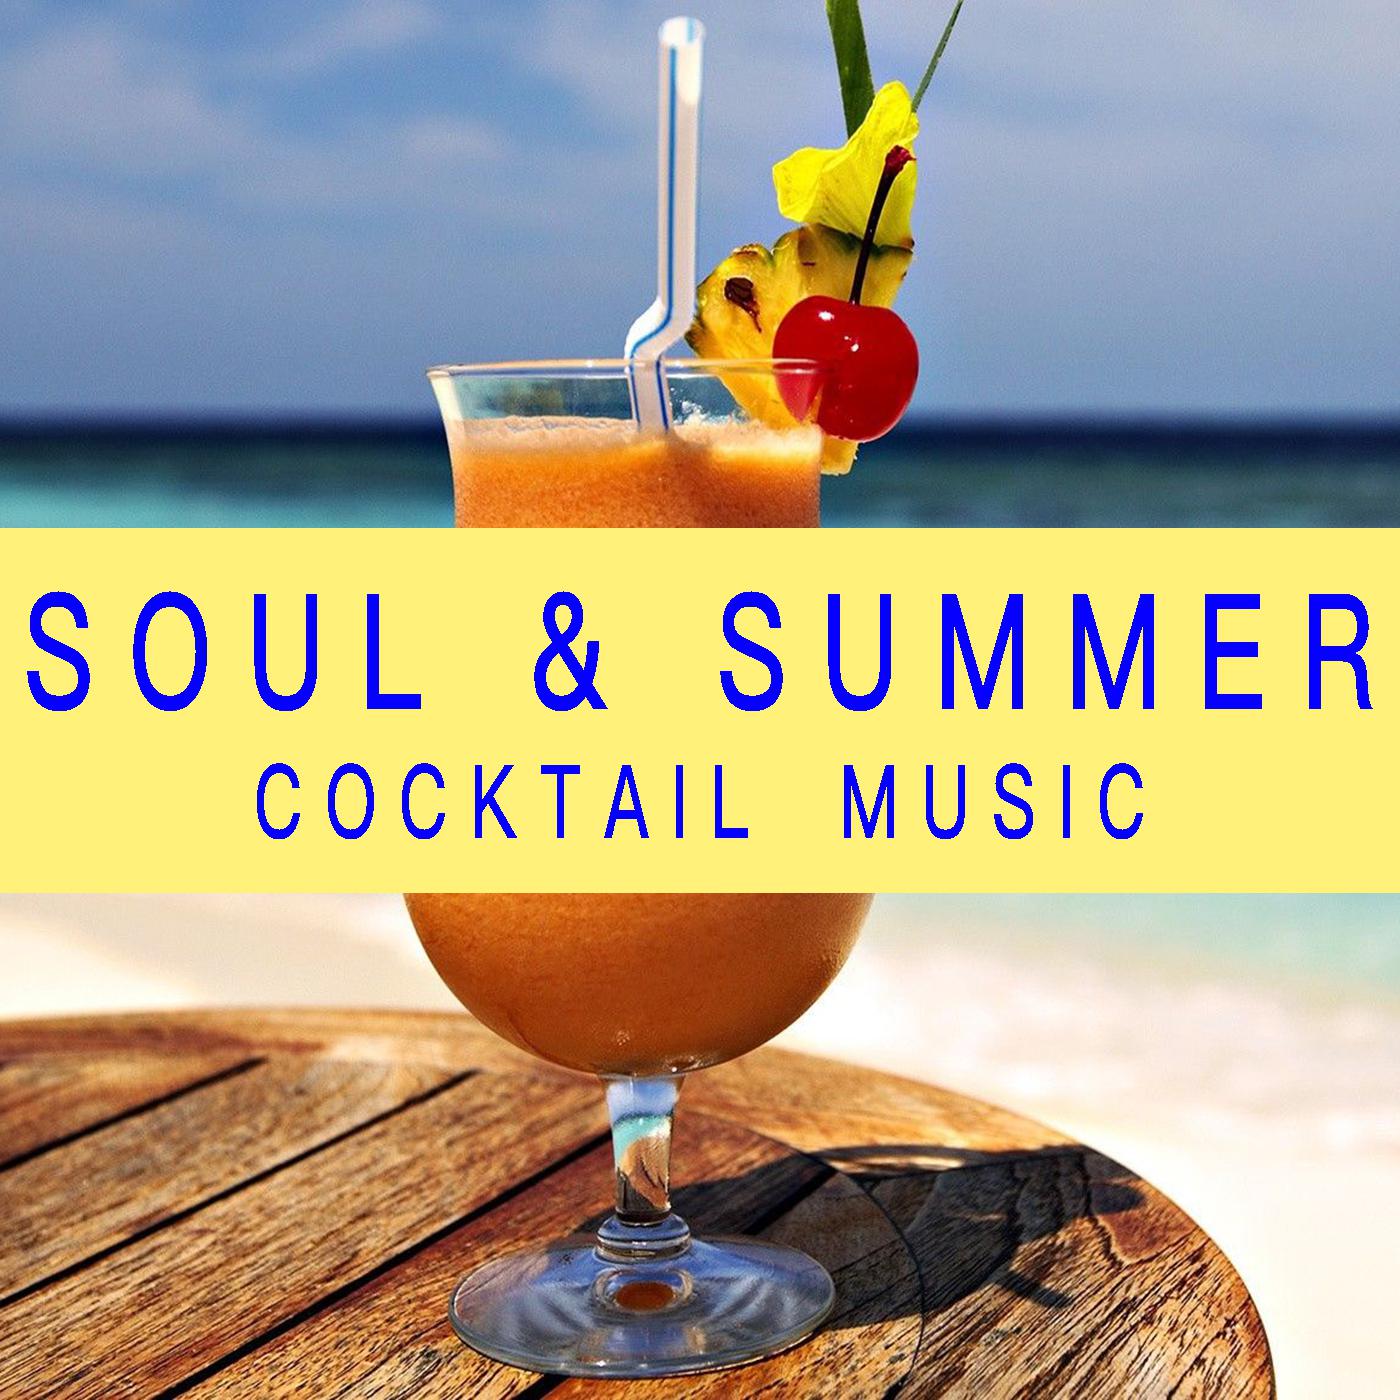 Soul & Summer Cocktail Music